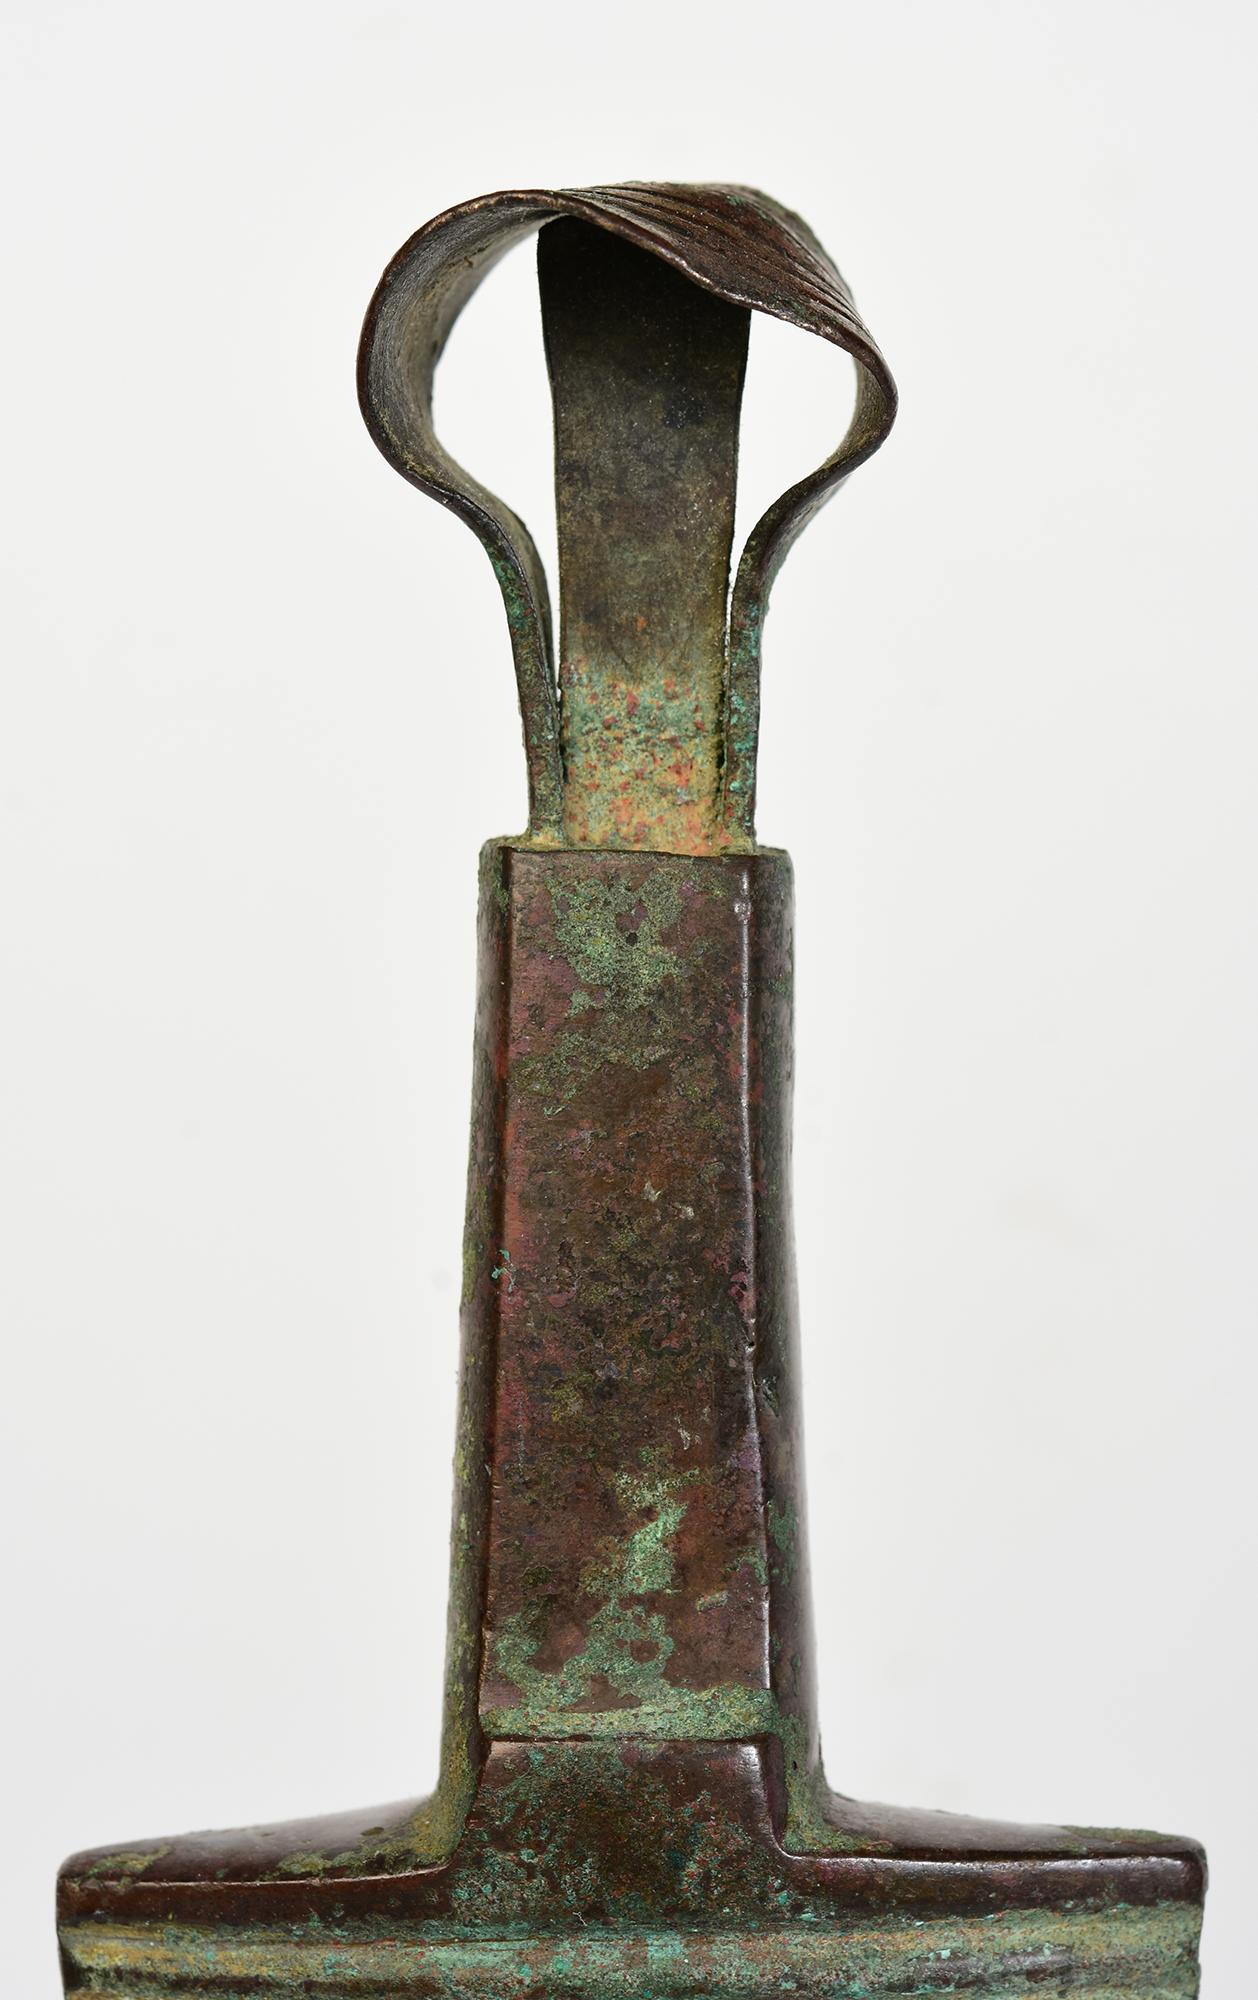 Ancient Luristan bronze sword with green patina.

Luristan bronze comes from the province of Lorestan, a region of nowadays Western Iran in the Zagros Mountains. With its rich and long history, Luristan culture is well-known for its fascinating